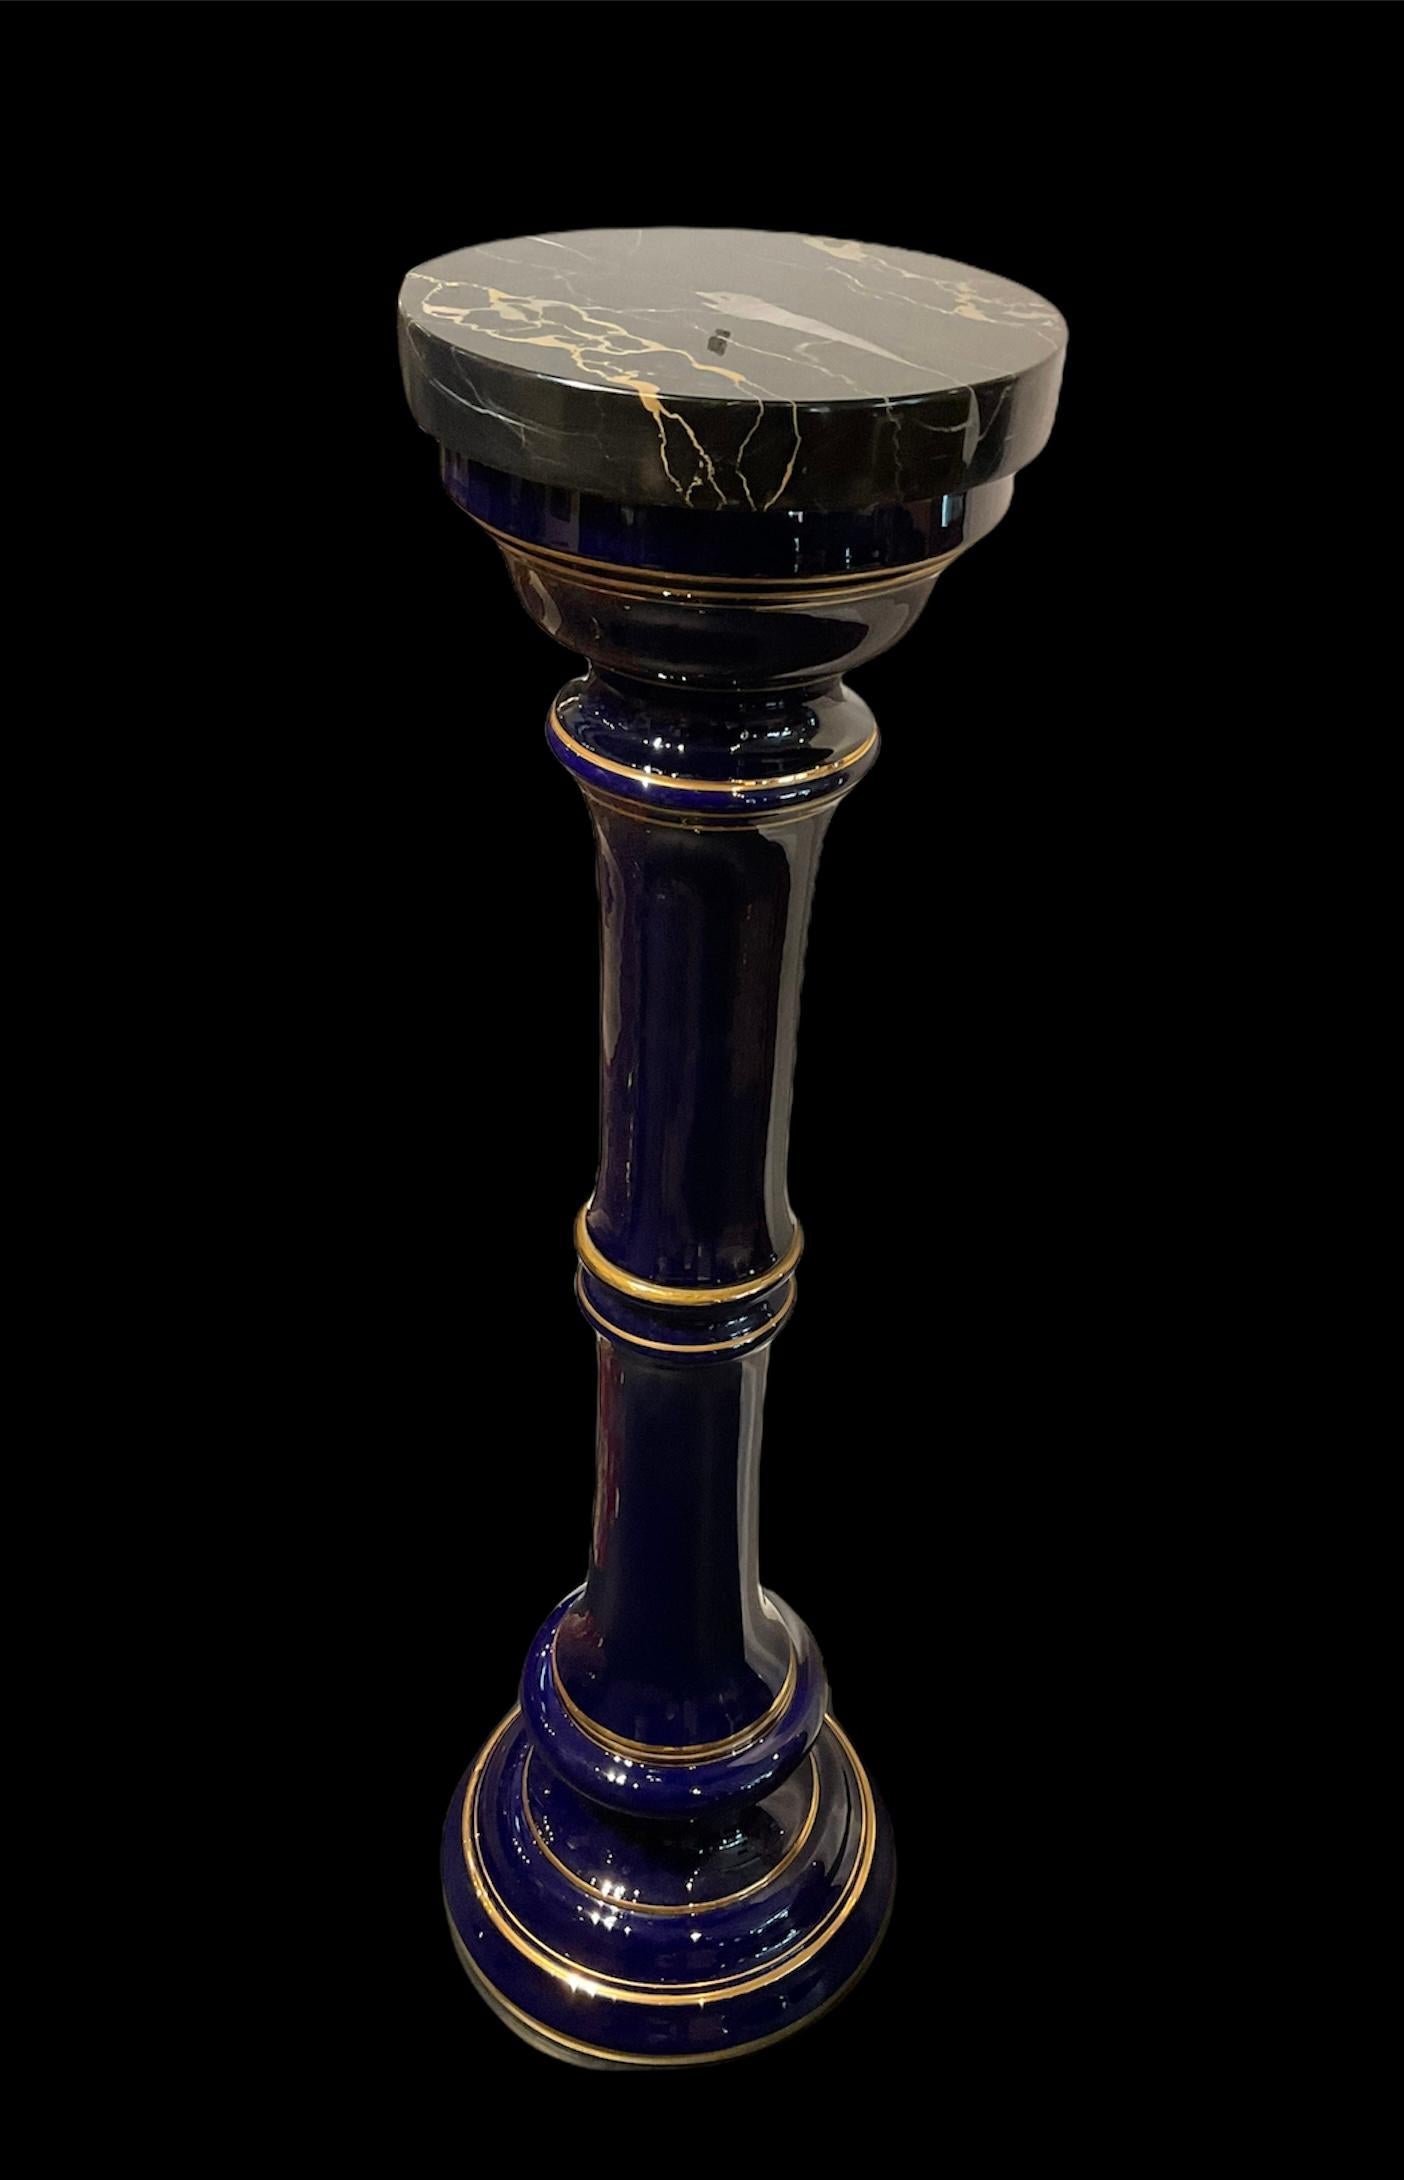 This is a cobalt blue Roman Tuscan shaped column with round black marble top. The column is adorned with several gilt rings around it at different levels from the top to the base.